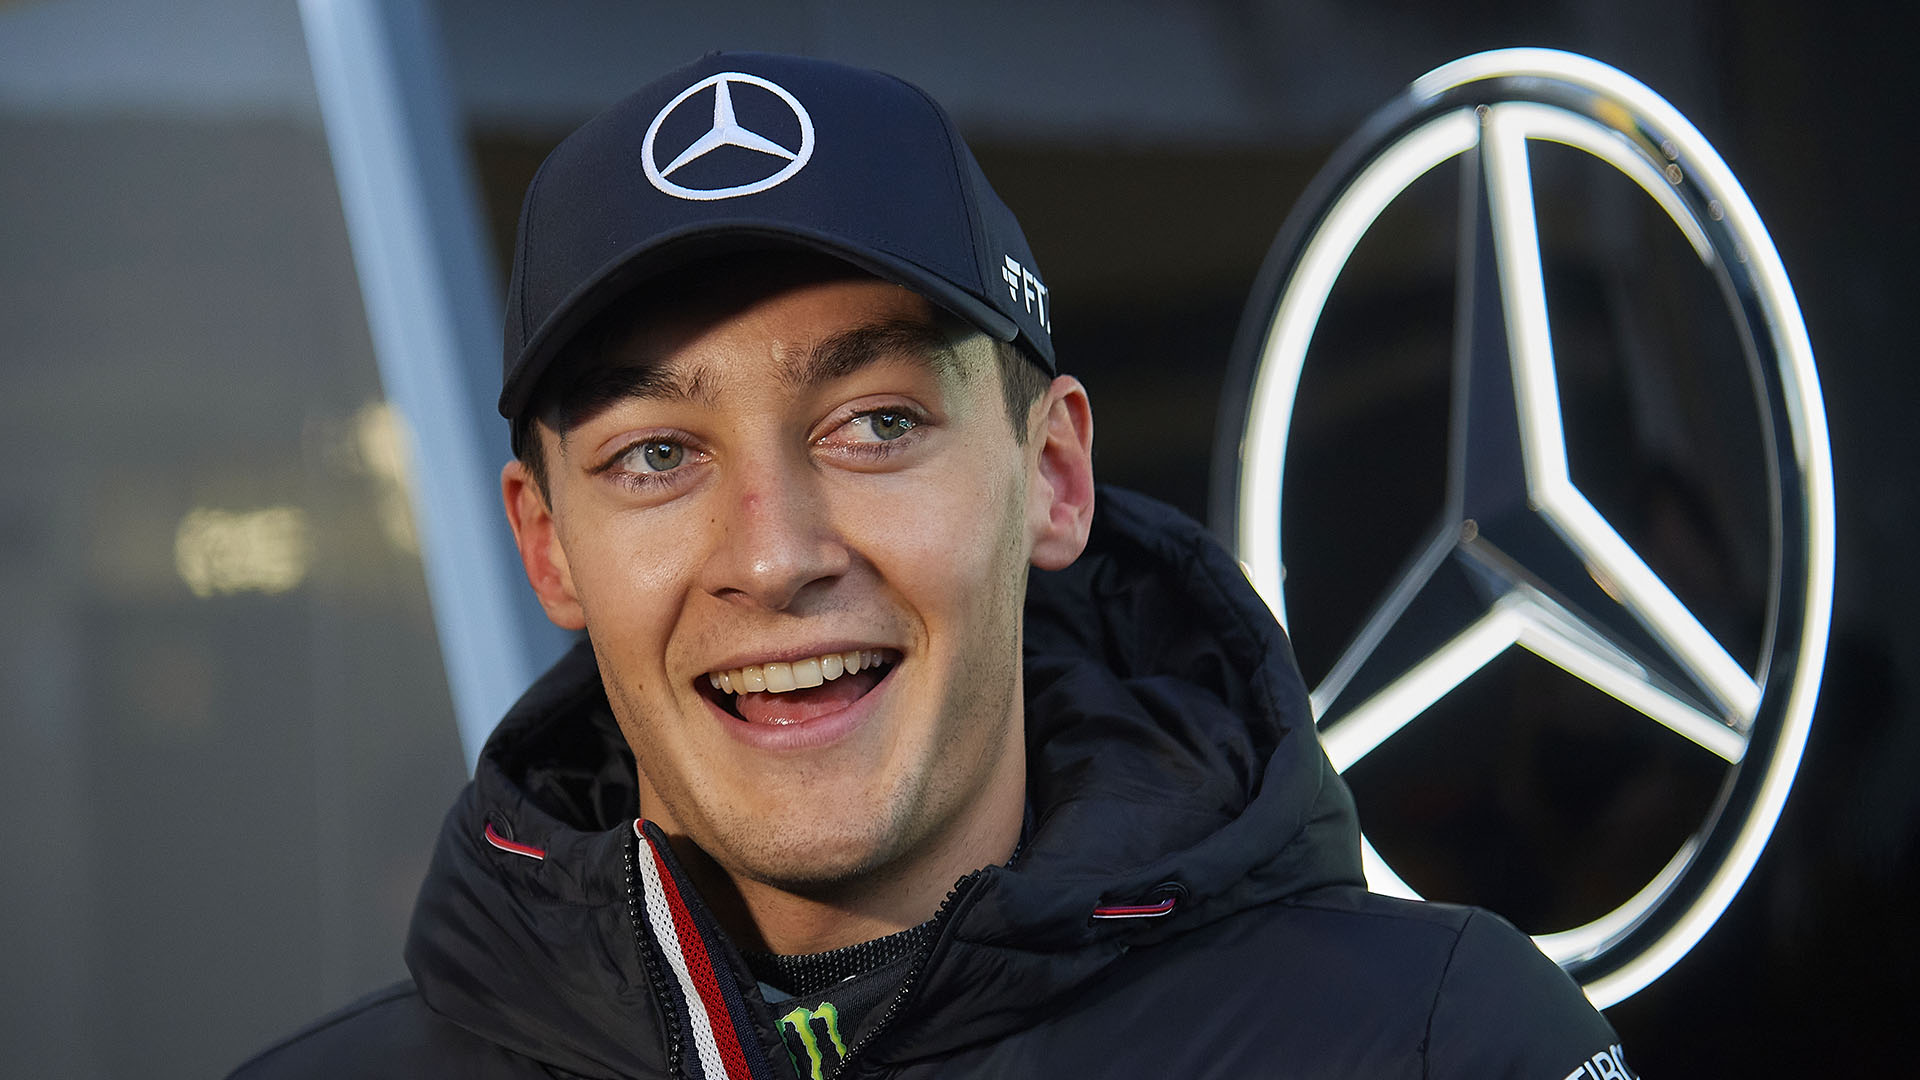 Russell considers the “great progress” at Mercedes: I have faith in the entire team